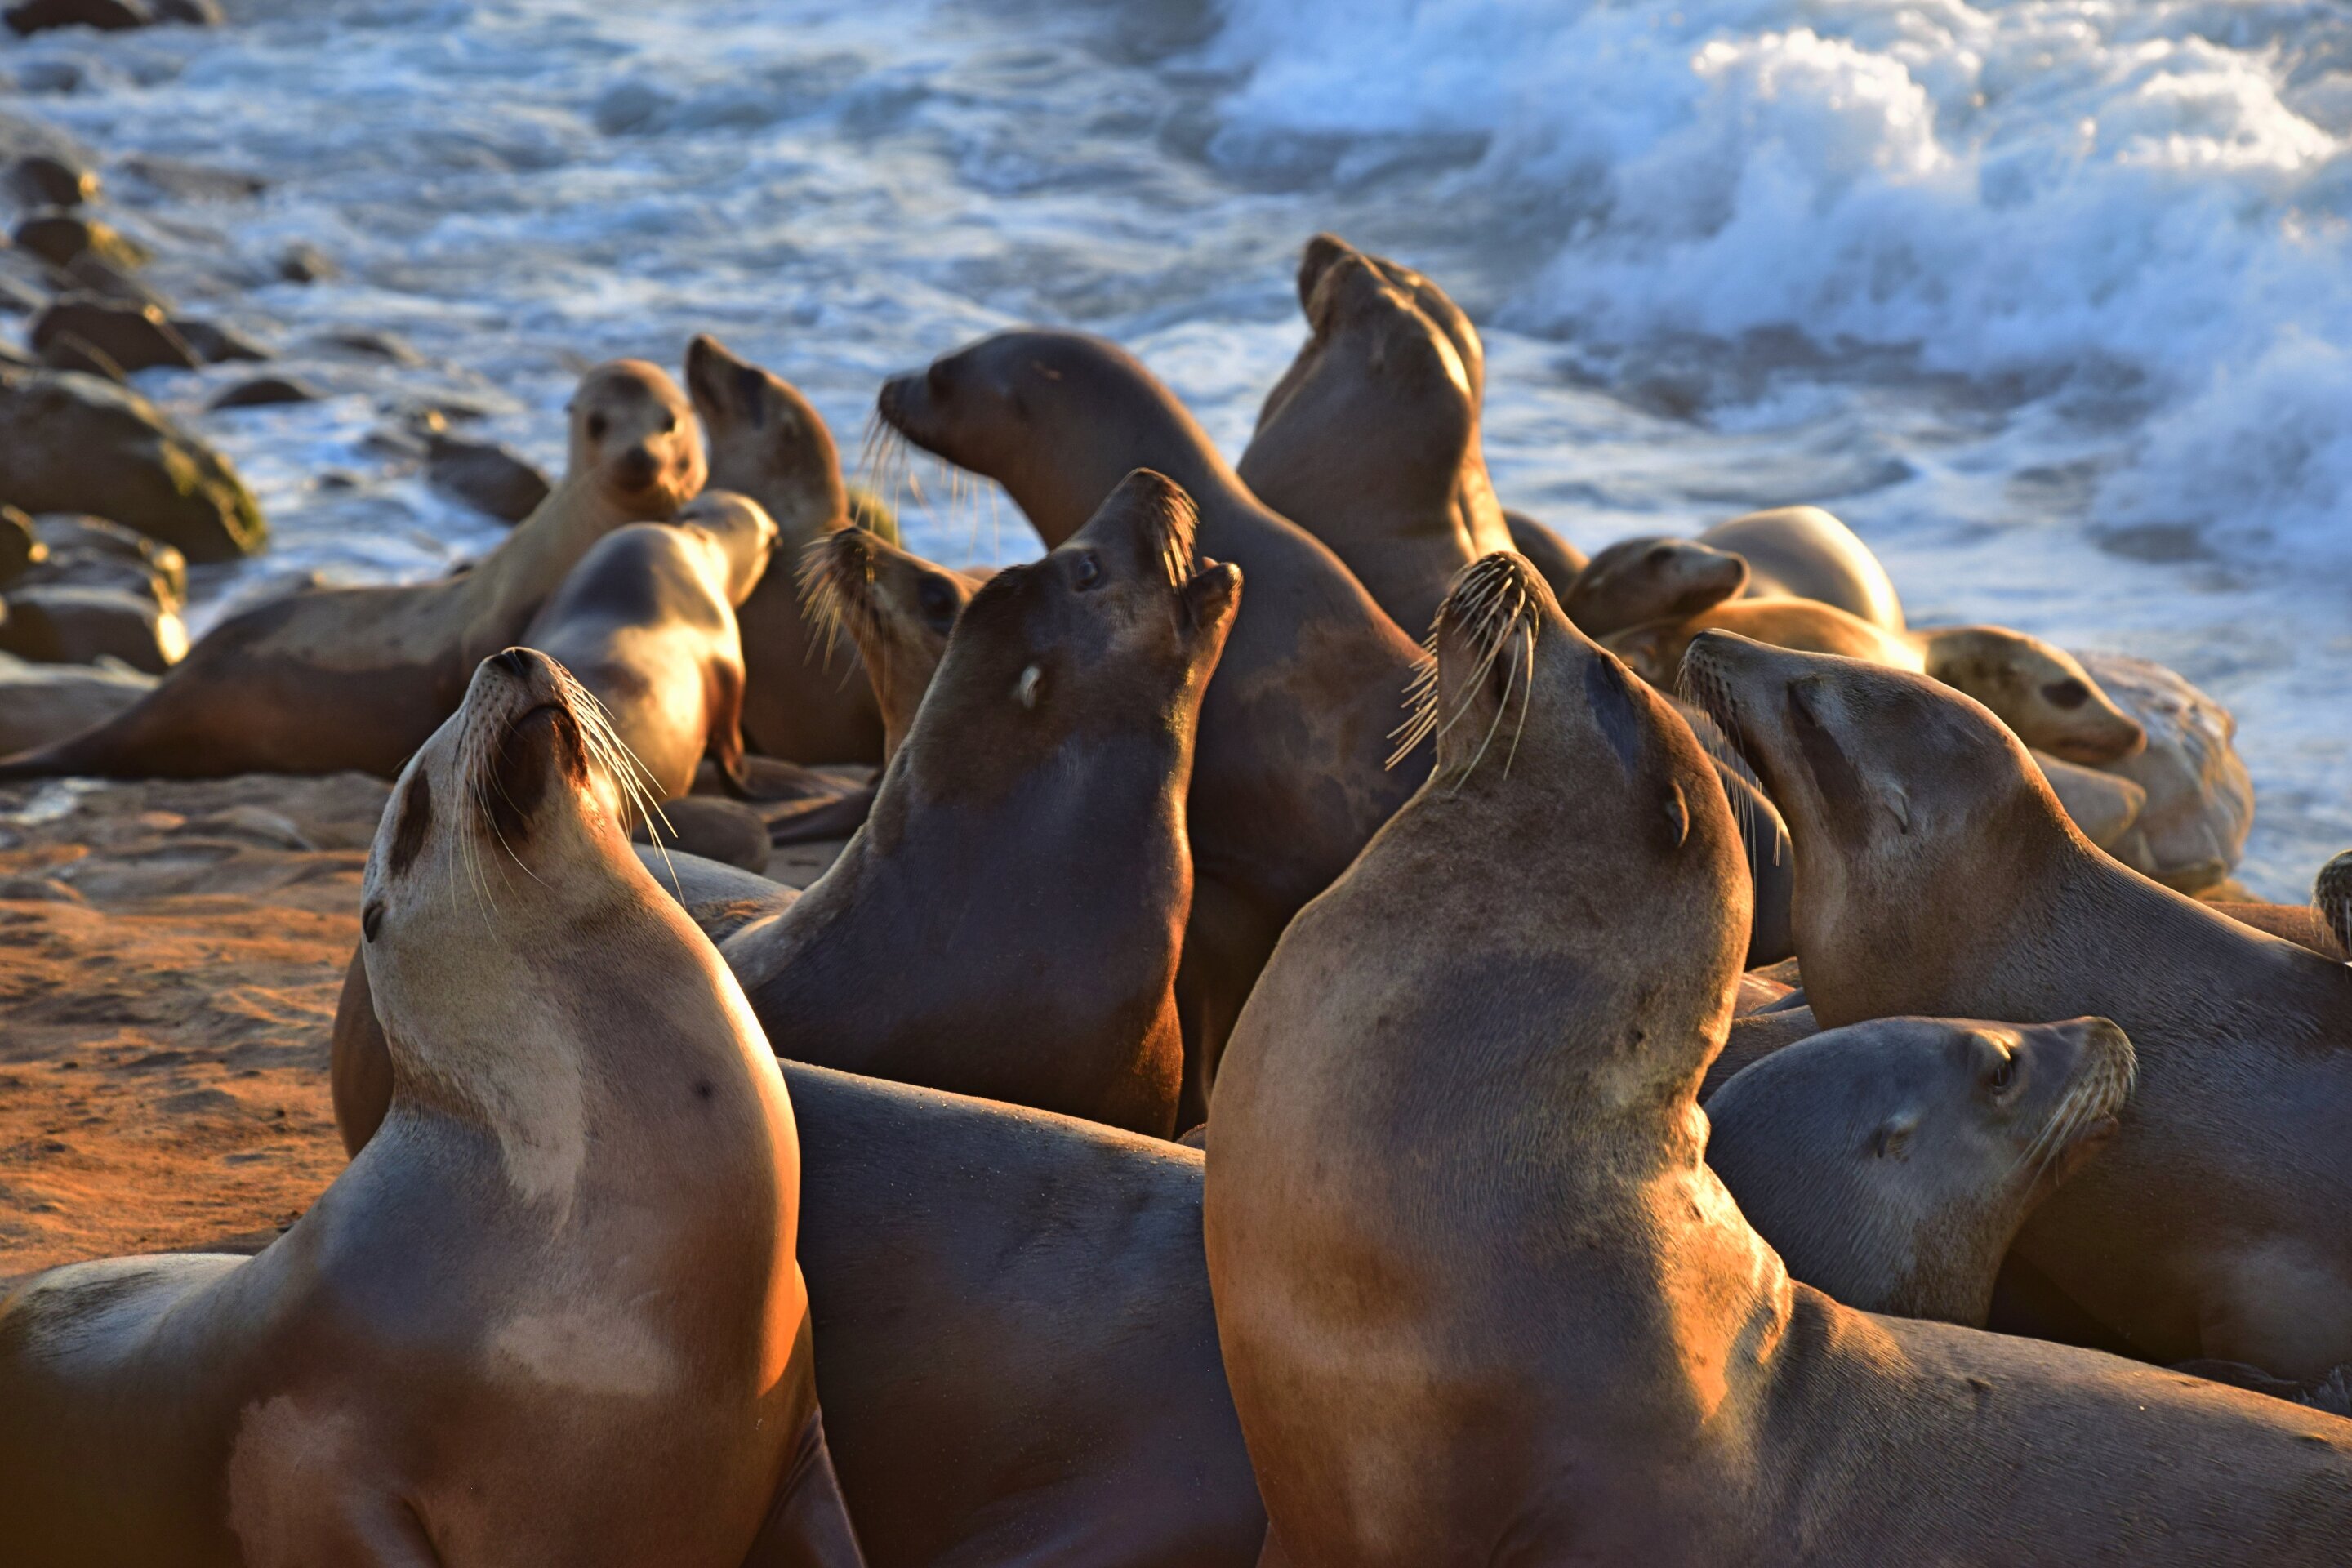 How hair dye is helping conservation of Australian sea lion population